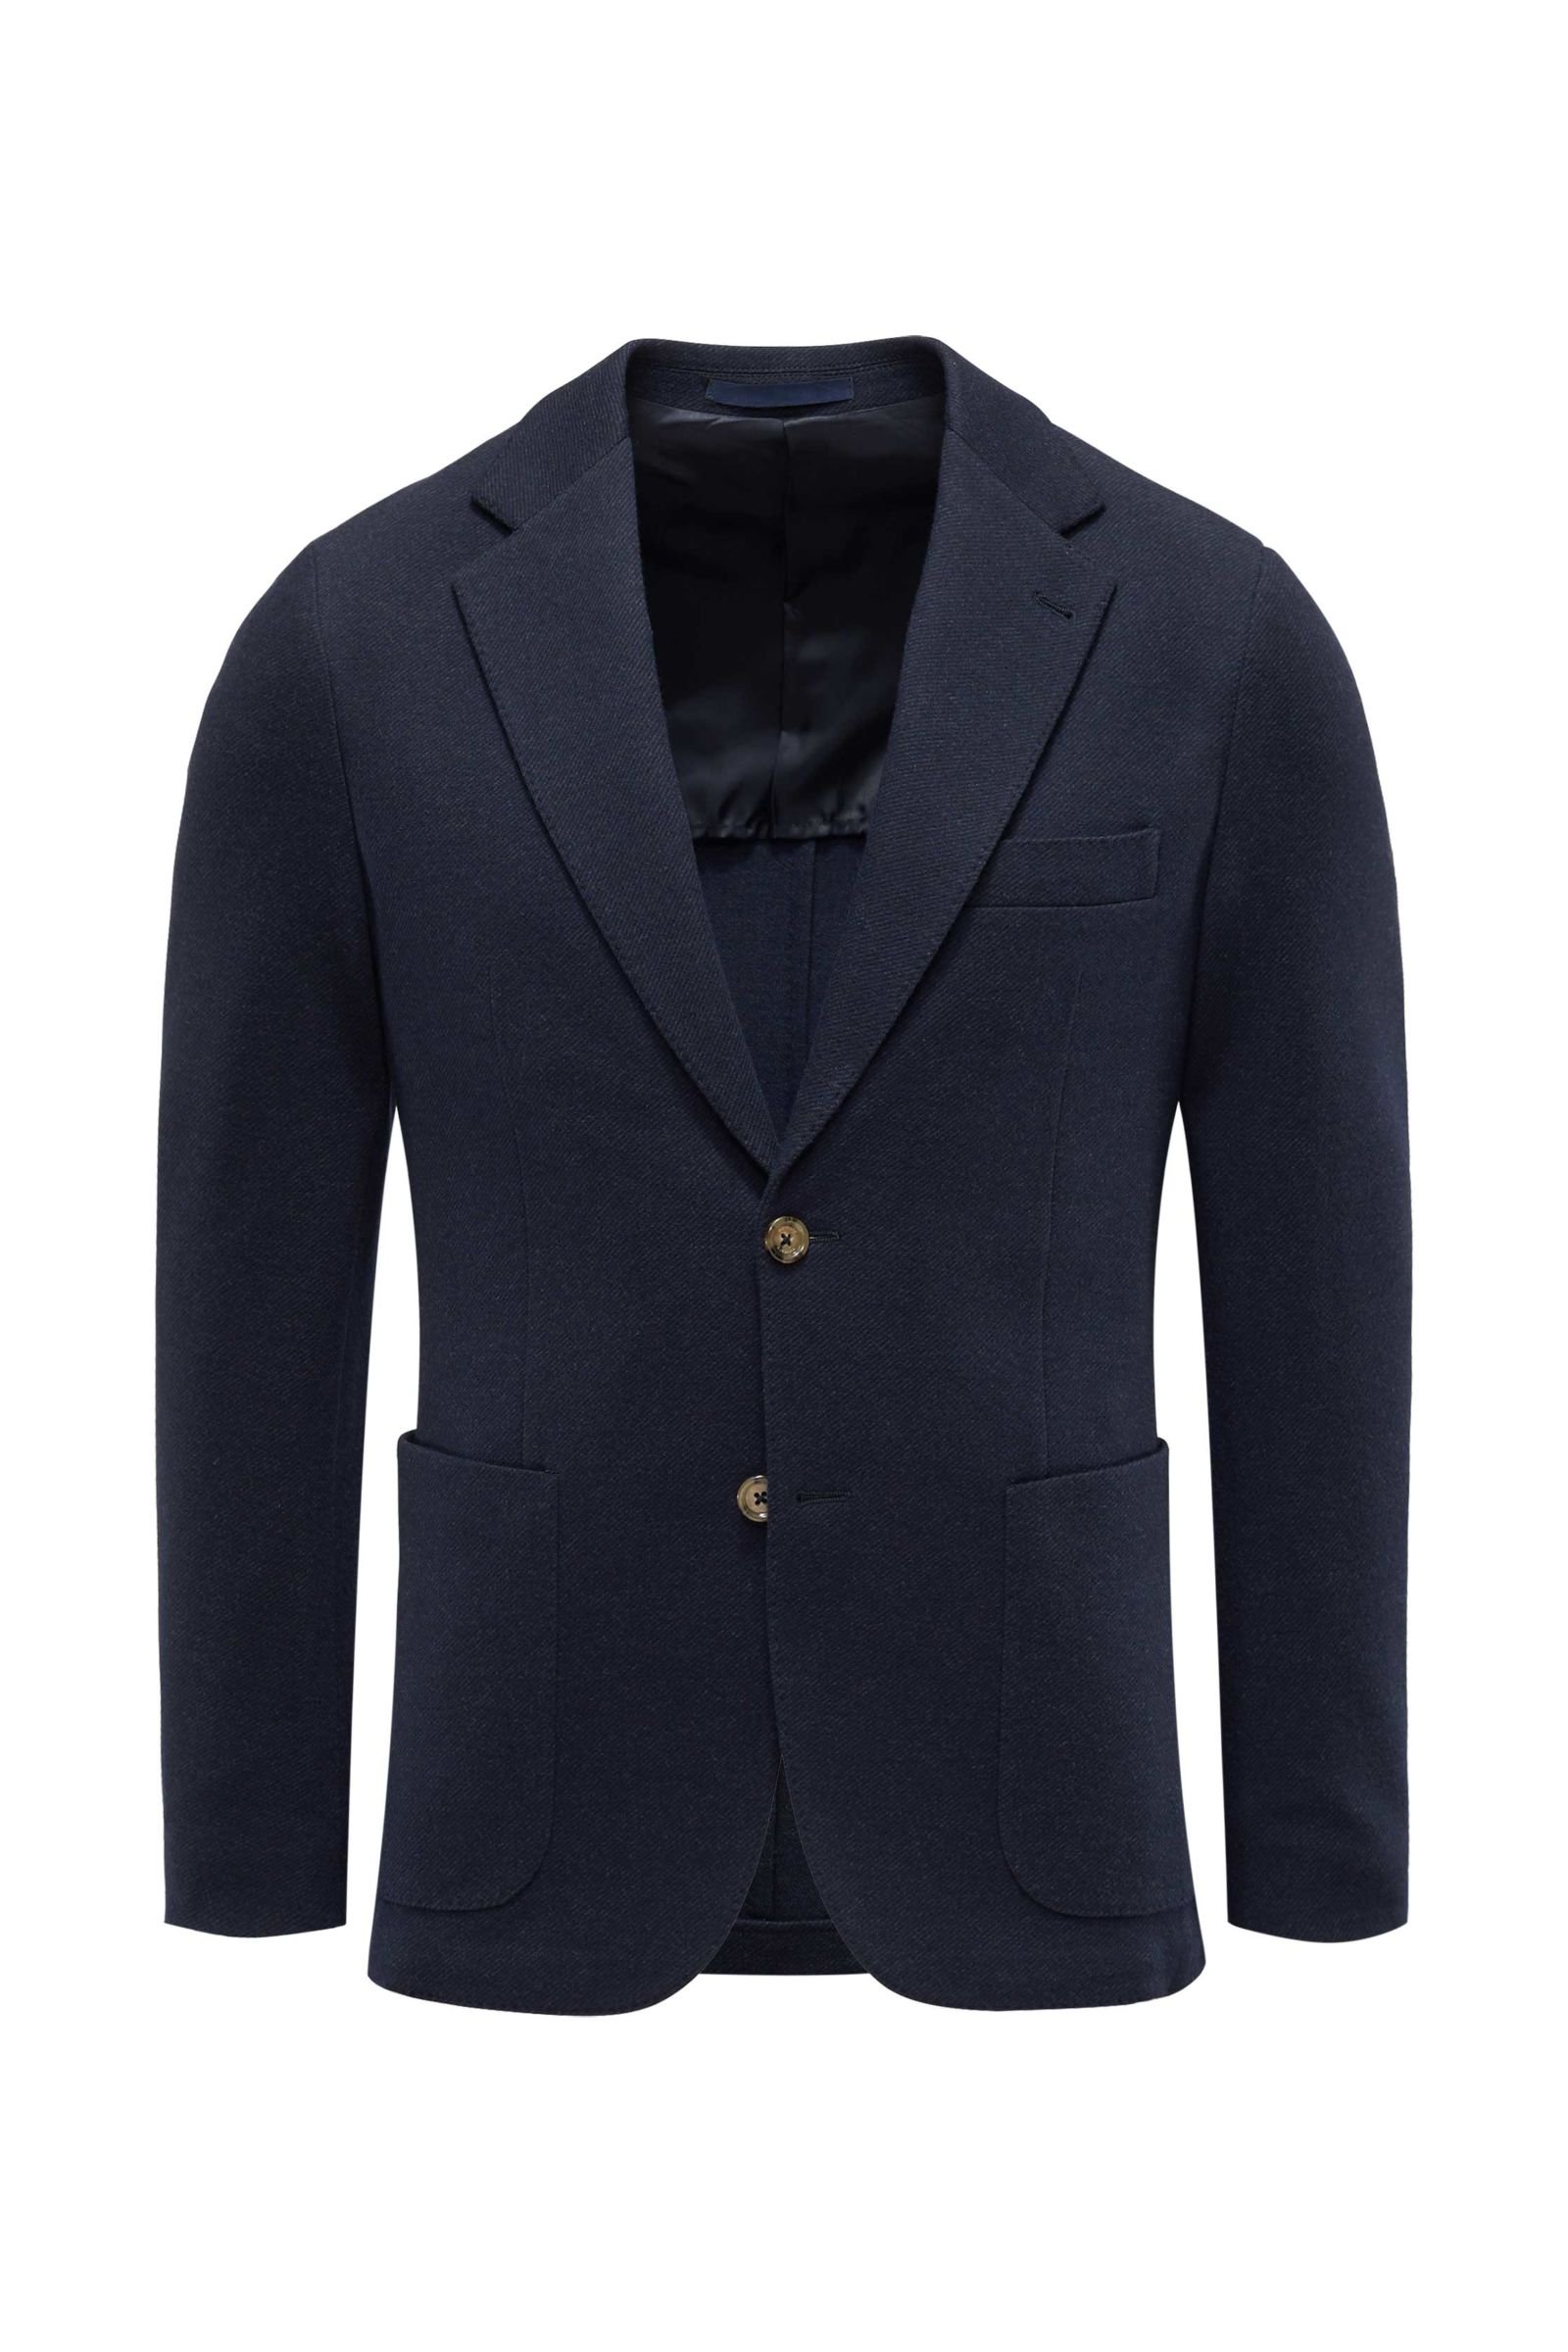 Jersey smart-casual jacket 'Athletic Fit' navy